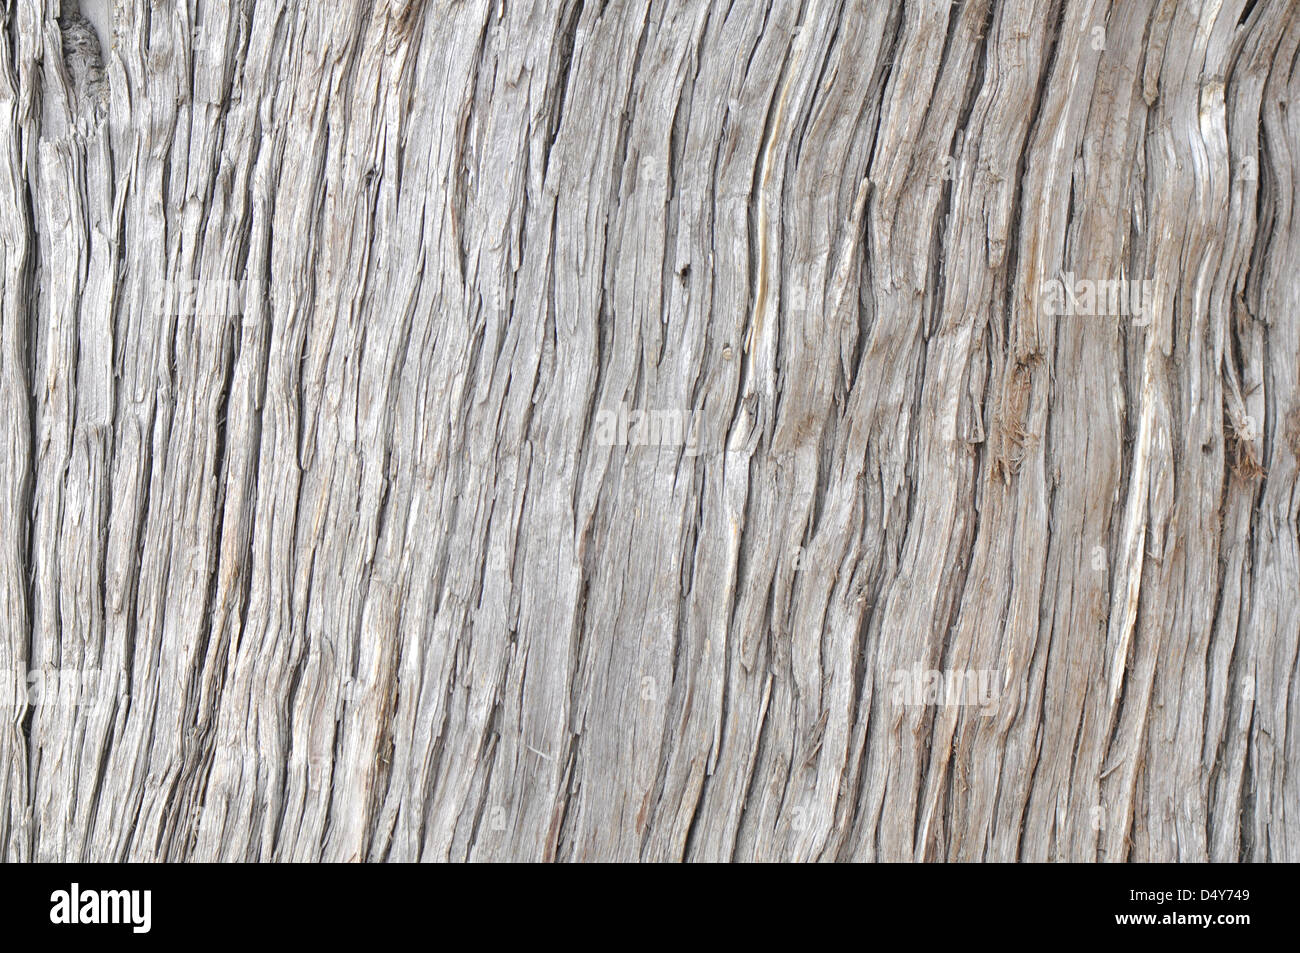 Aged wood bark with irregular texture, can be used as background Stock Photo